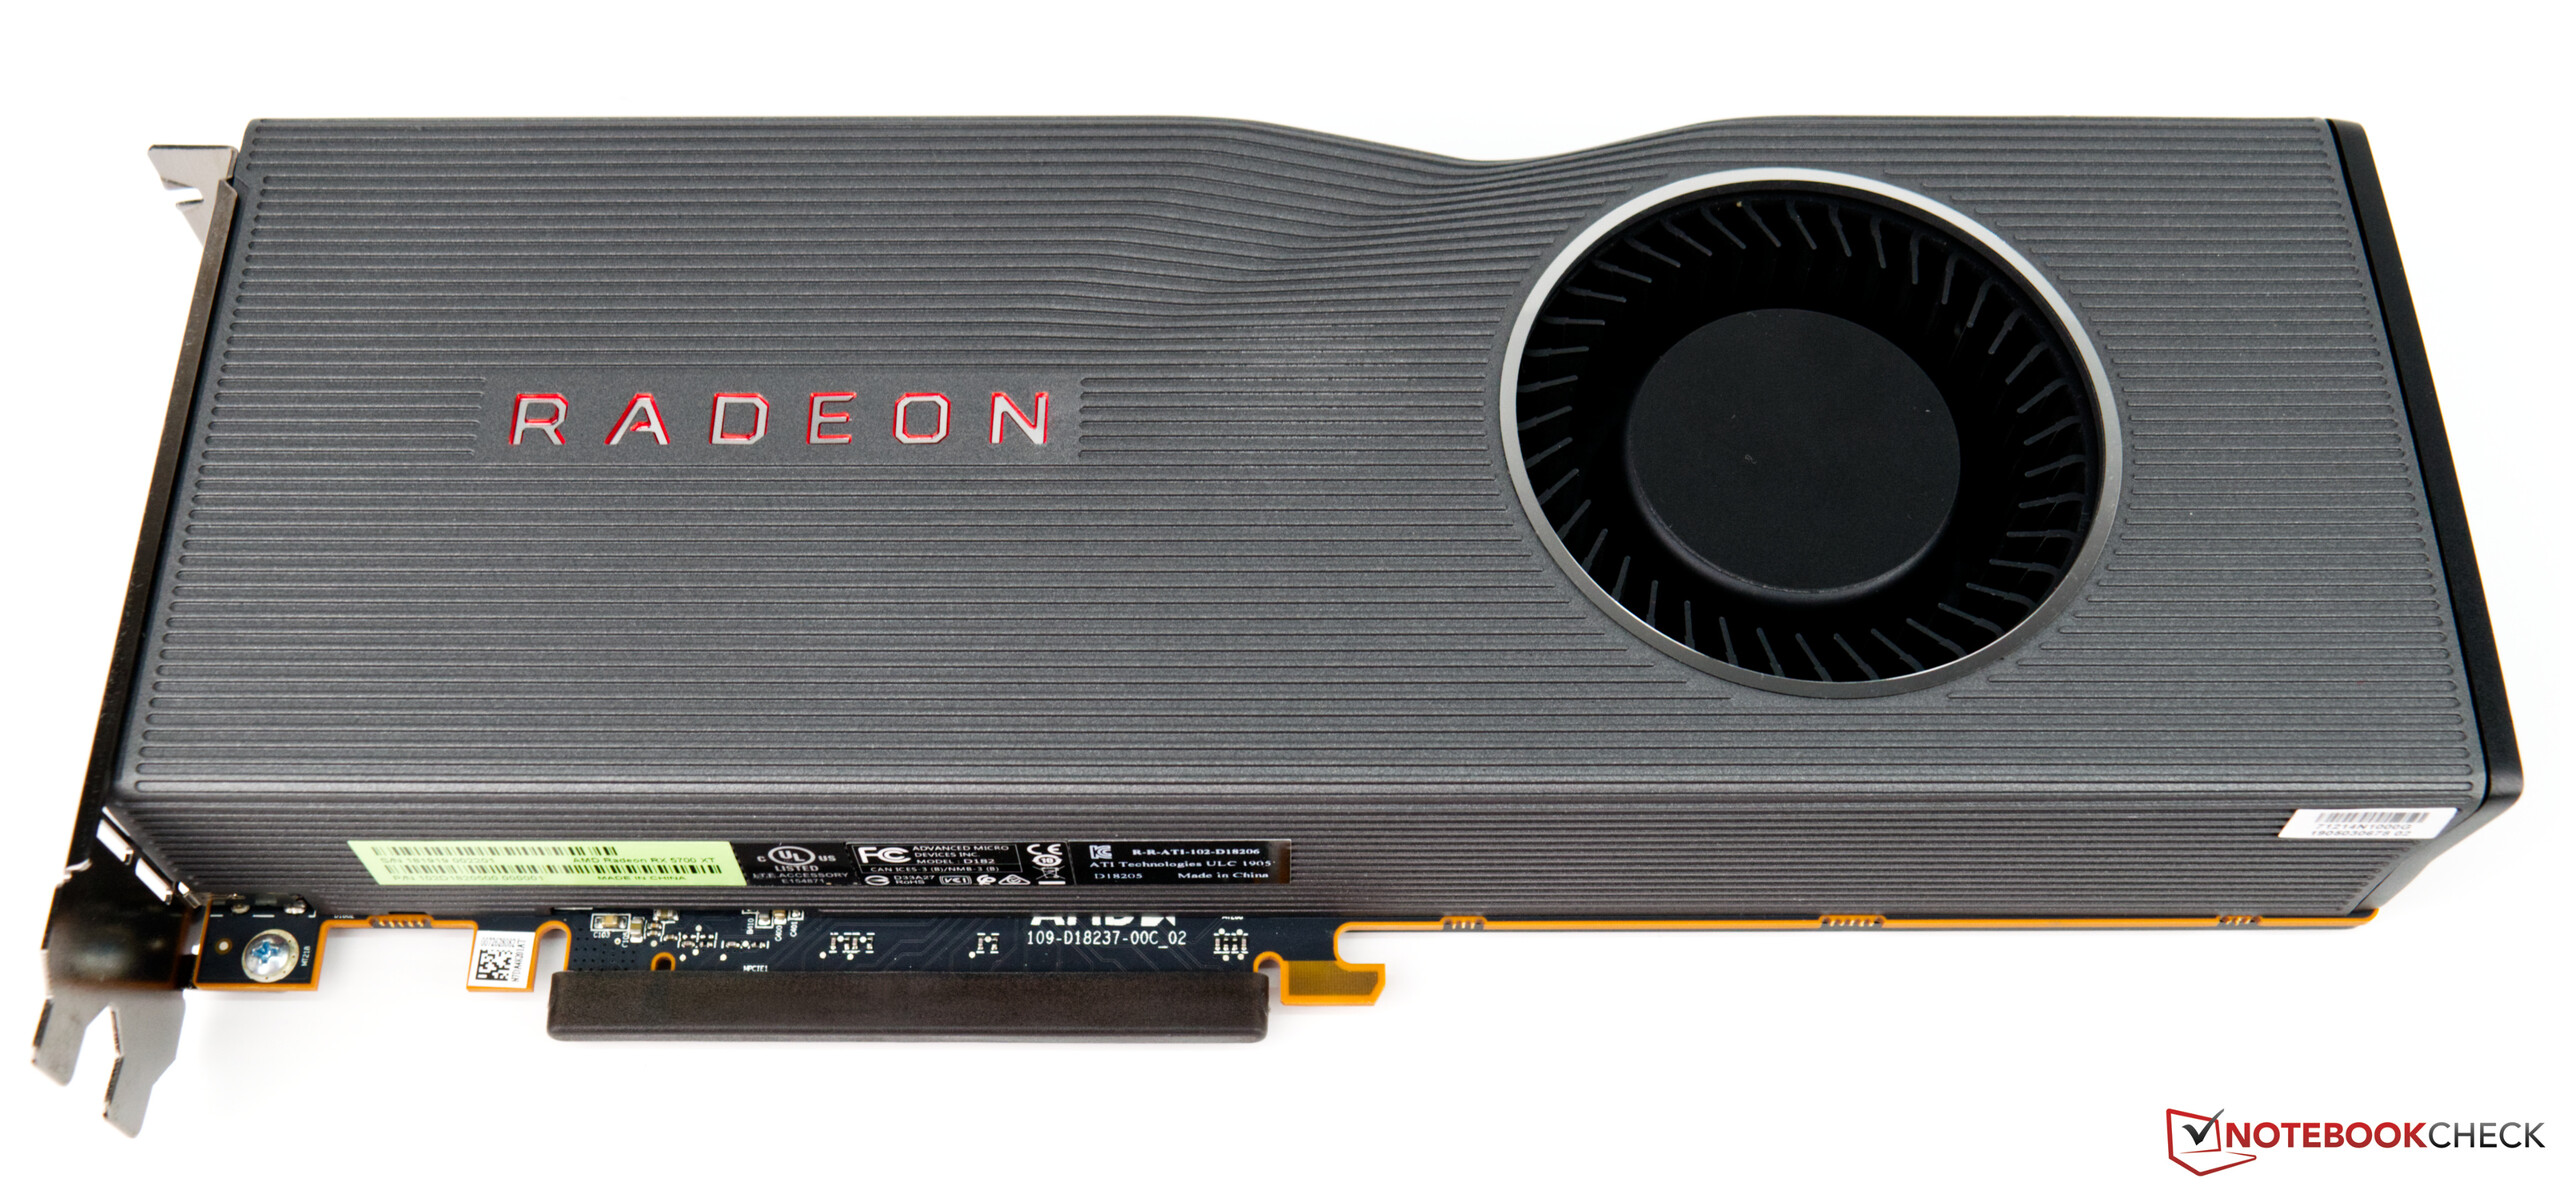 Amd Radeon Rx 5700 Xt Review Known Issues Of The Reference Design Notebookcheck Net Reviews